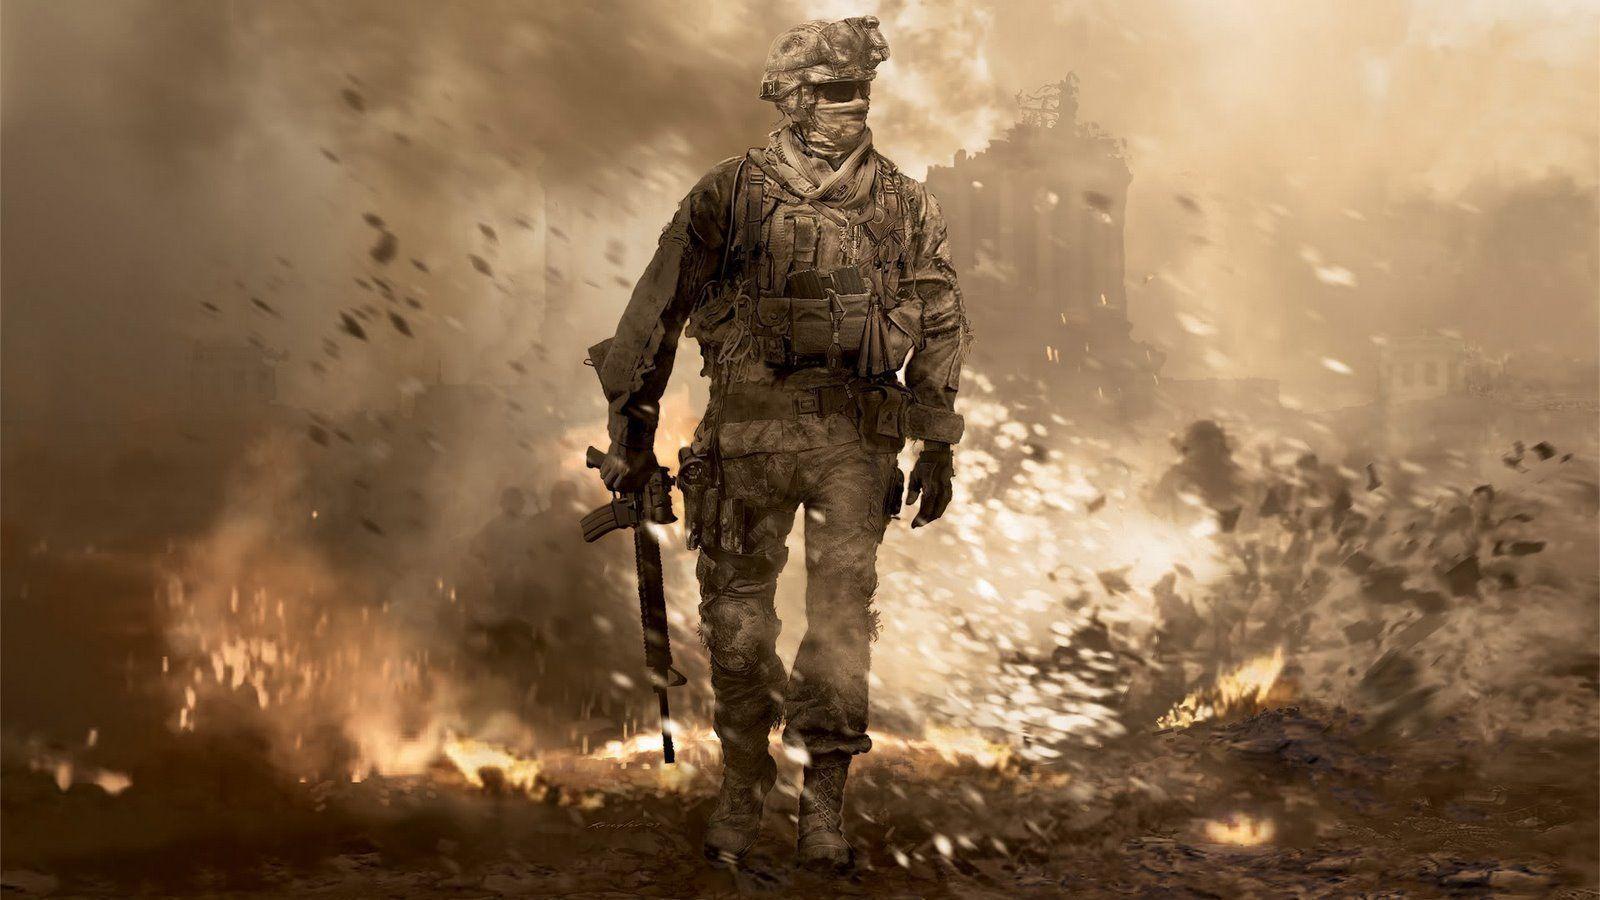  4K  Call  of Duty  Wallpapers  Top Free 4K  Call  of Duty  